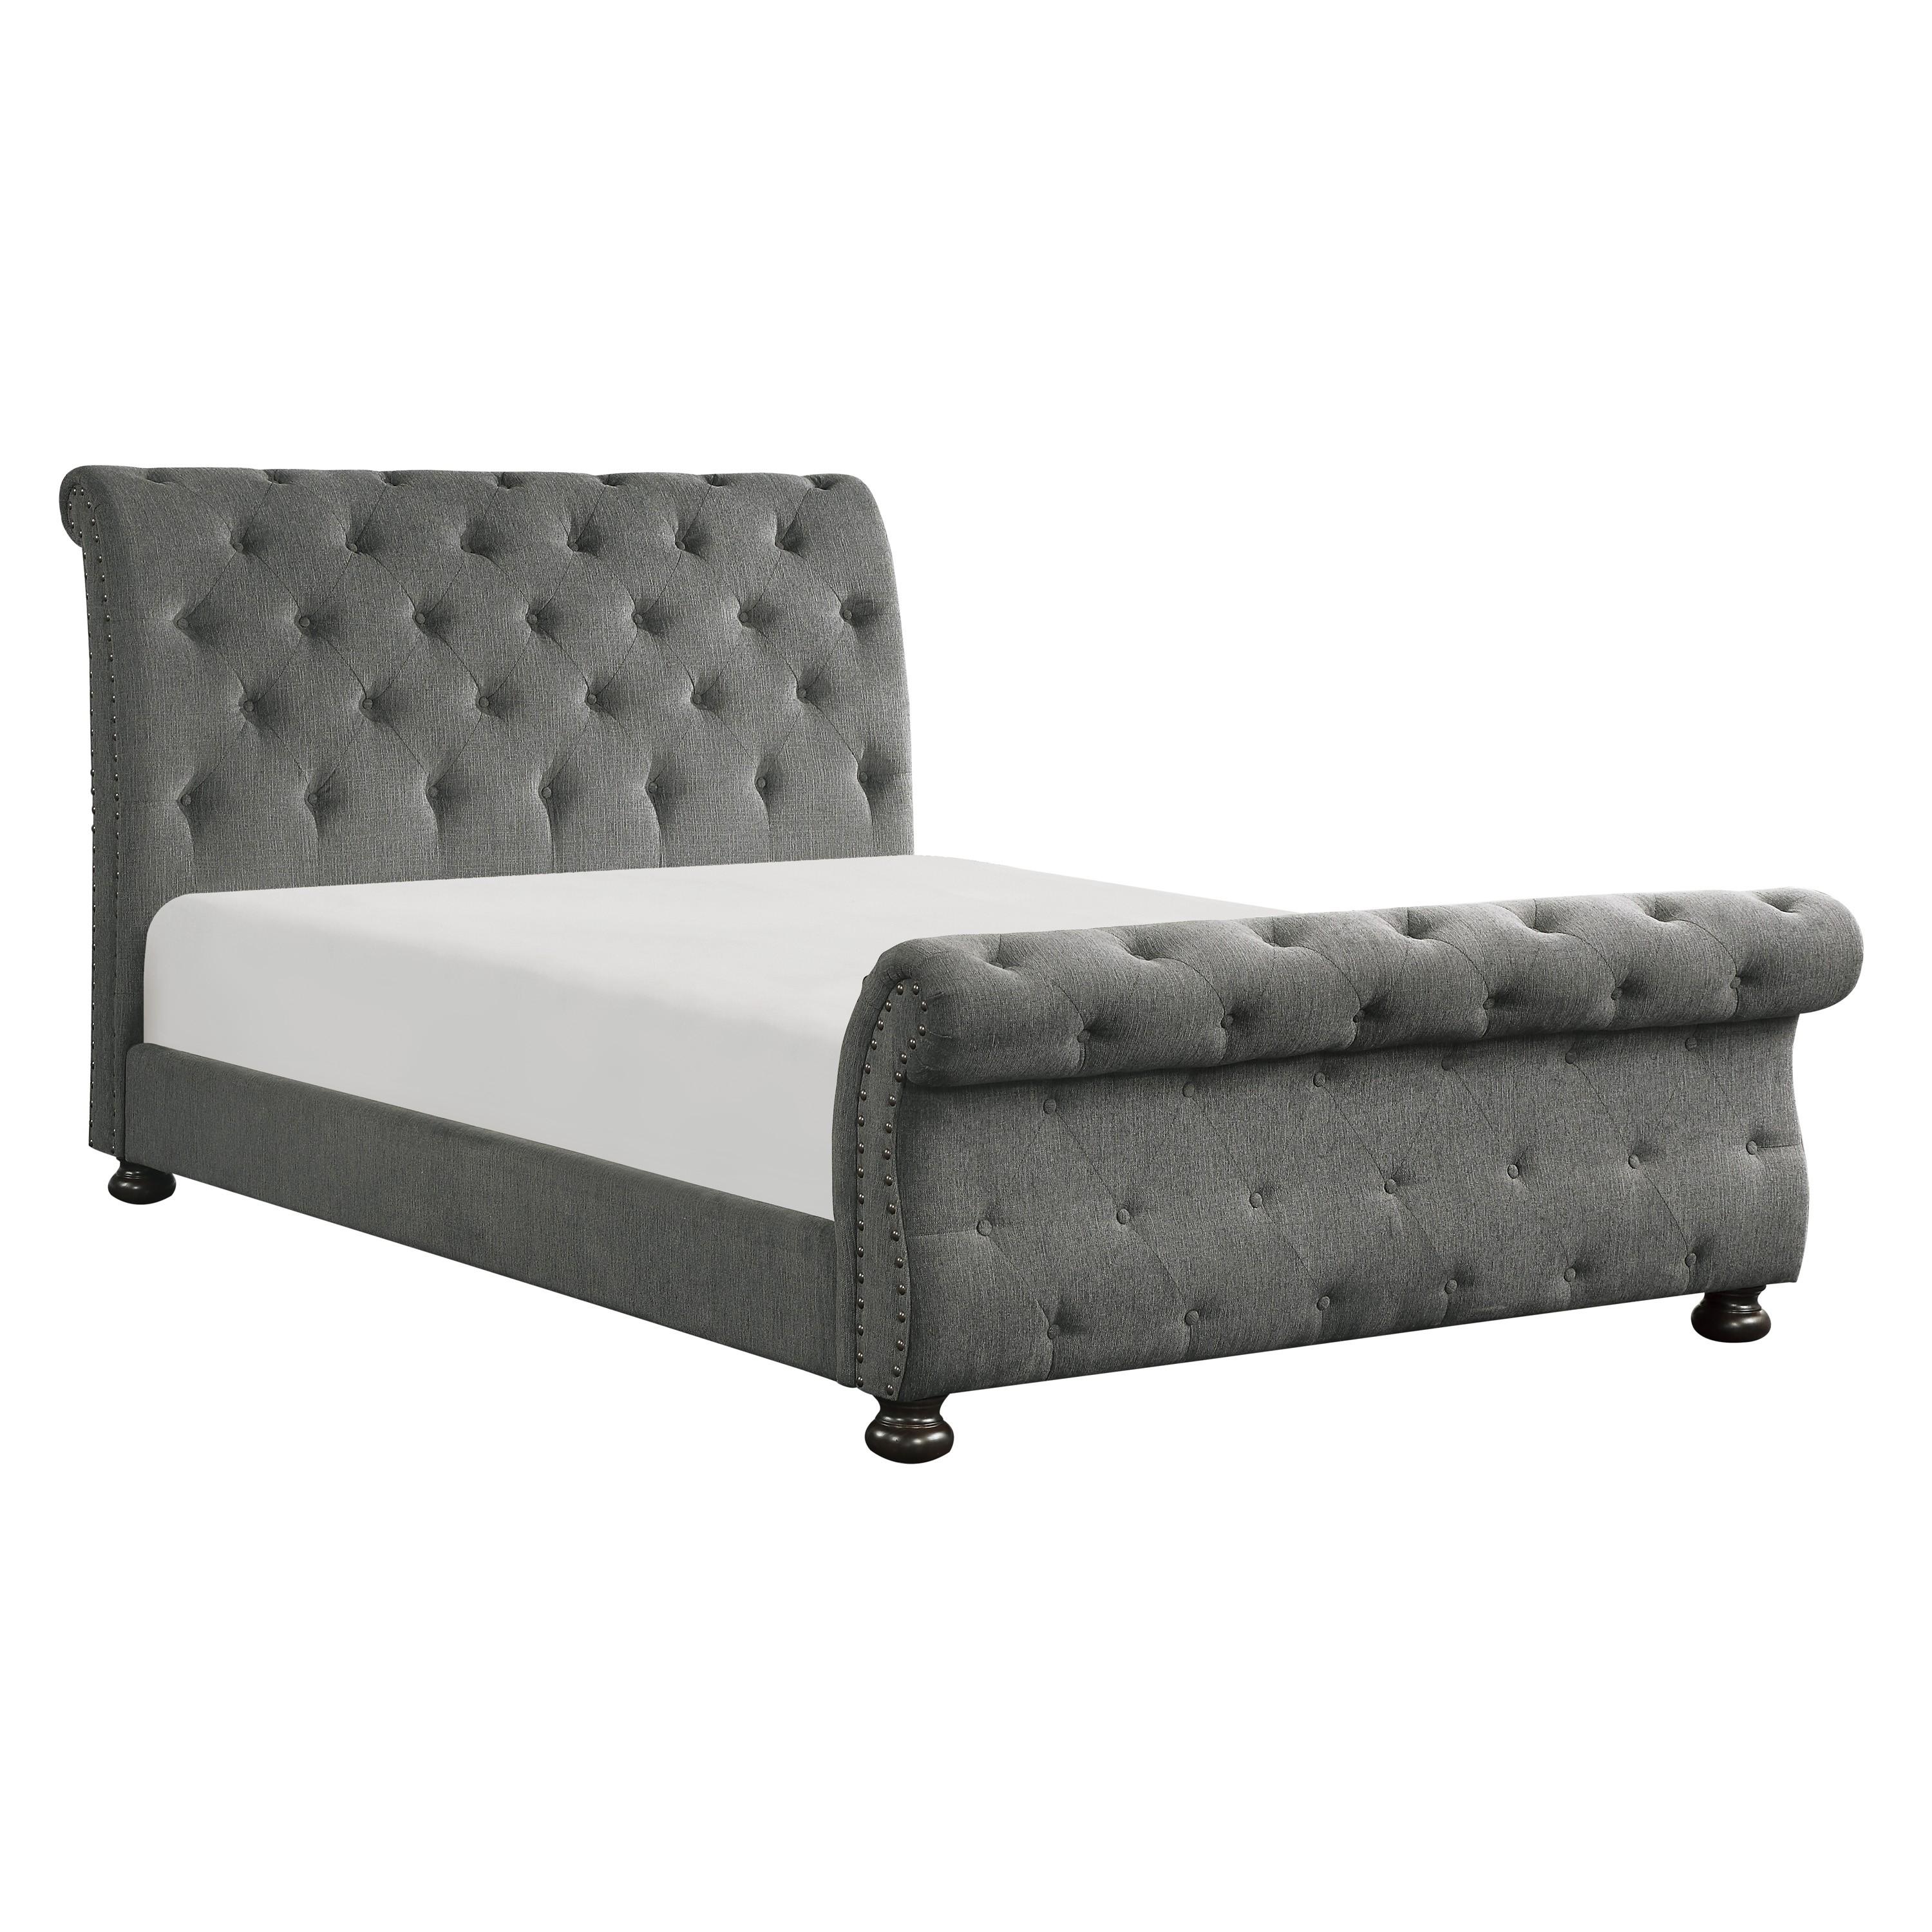 Traditional Bed 1549GY-1* Crofton 1549GY-1* in Dark Gray Chenille